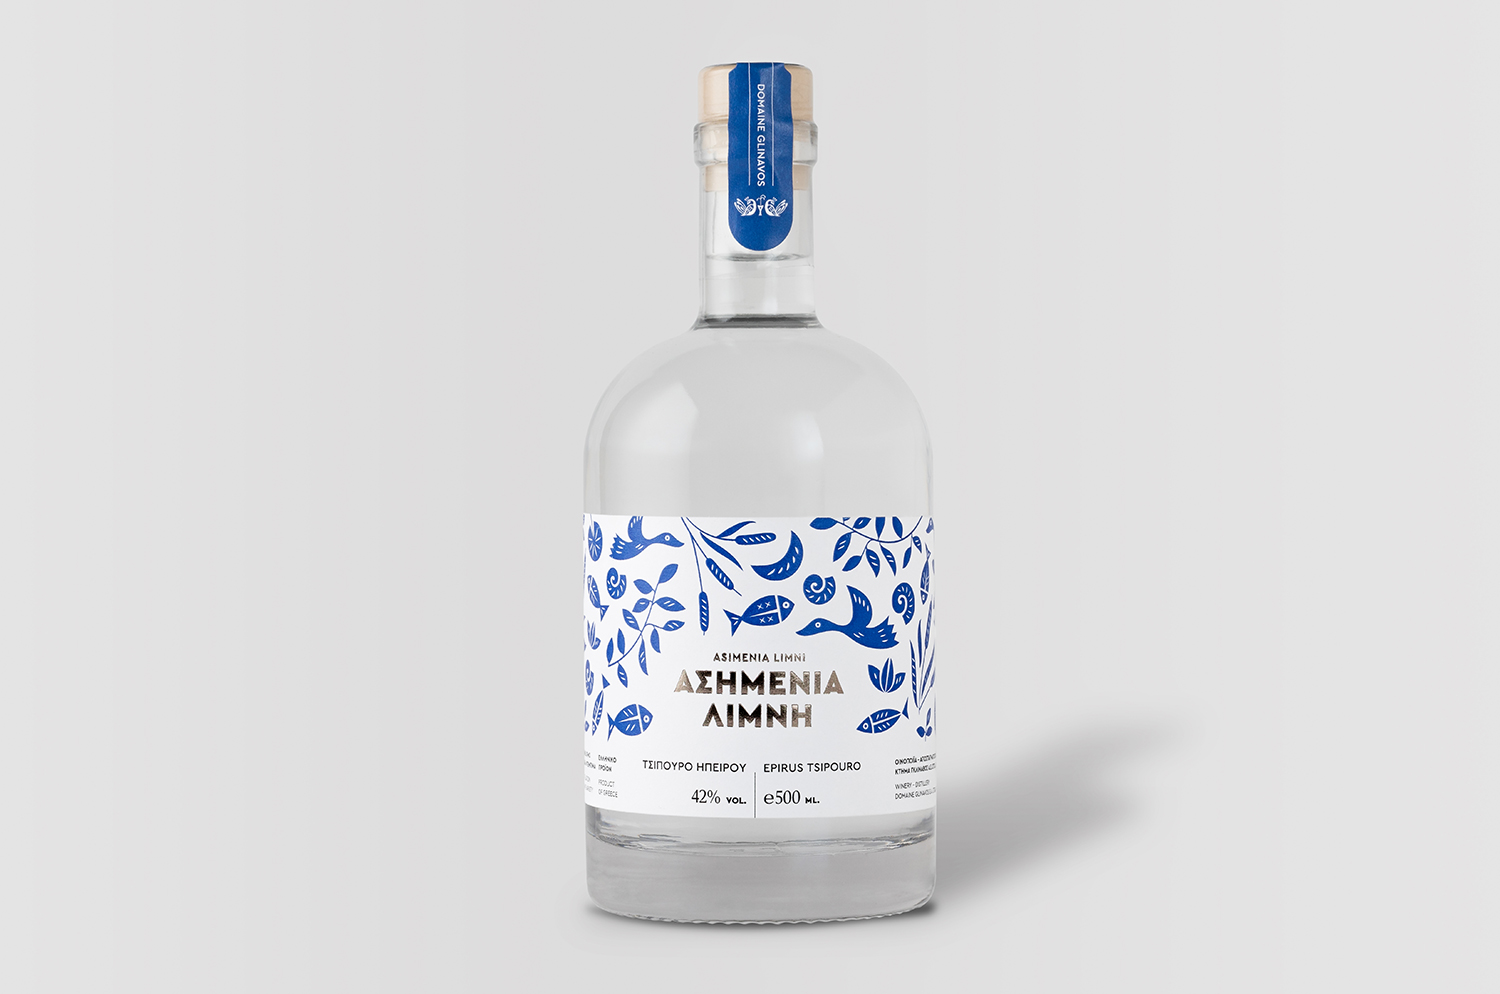 Packaging-Redesign-with-New-Product-Name,-Illustrative-Elements-of-Lake-Ioannina--2F-World-Brand---Packaging-Design-Society